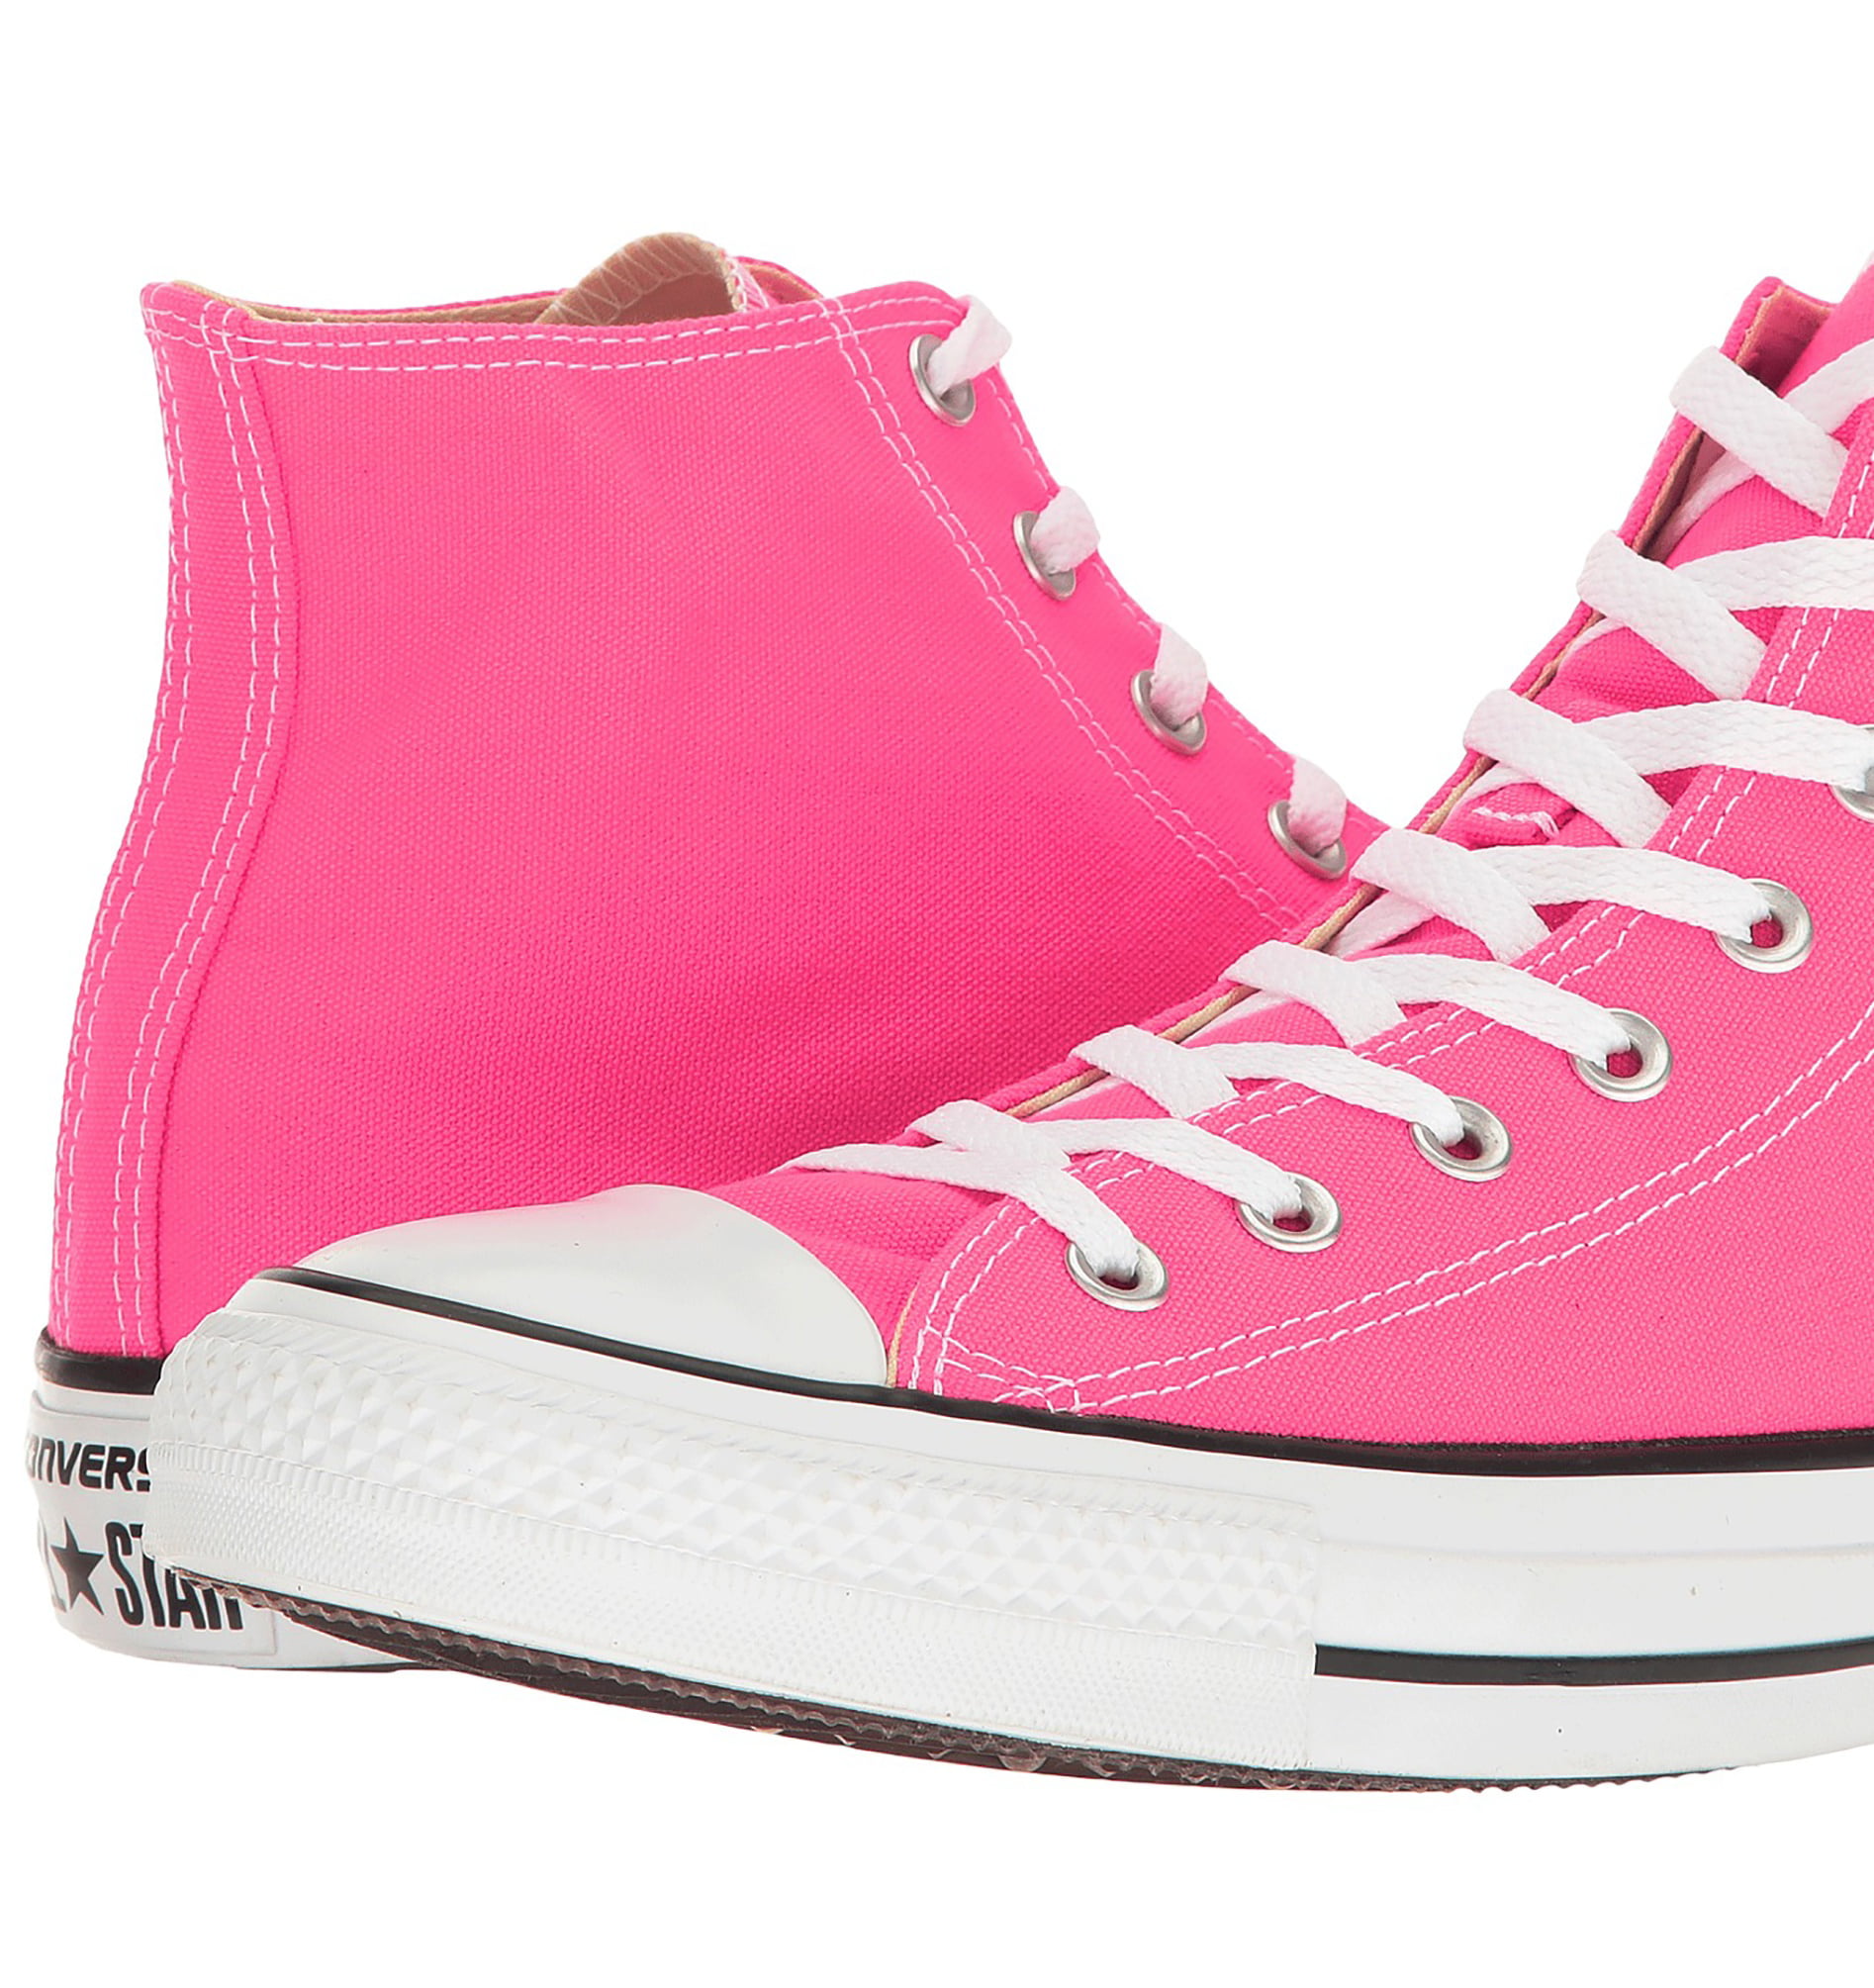 Converse Shoes Chuck Taylor Hi All Star Pink Sneakers Men 5.5 Womens 7.5